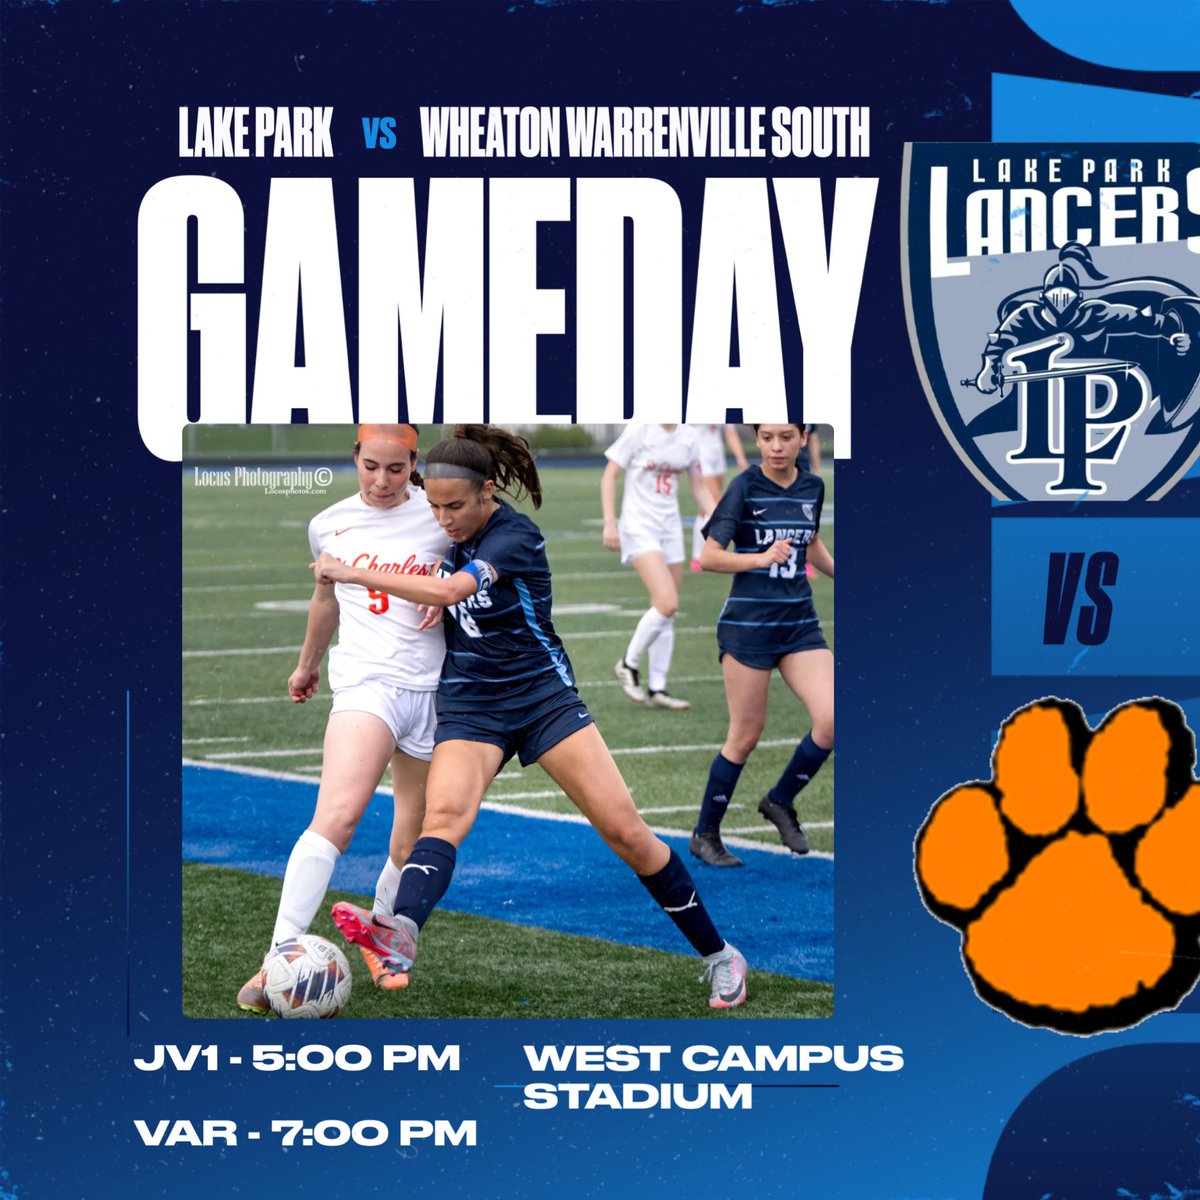 🚨GAMEDAY🚨 Lake Park Girls Soccer are back to DuKane Conference action tonight against Wheaton Warrenville South at home! Come out and support! JV1 - 5:00 PM VARSITY - 7:00 PM